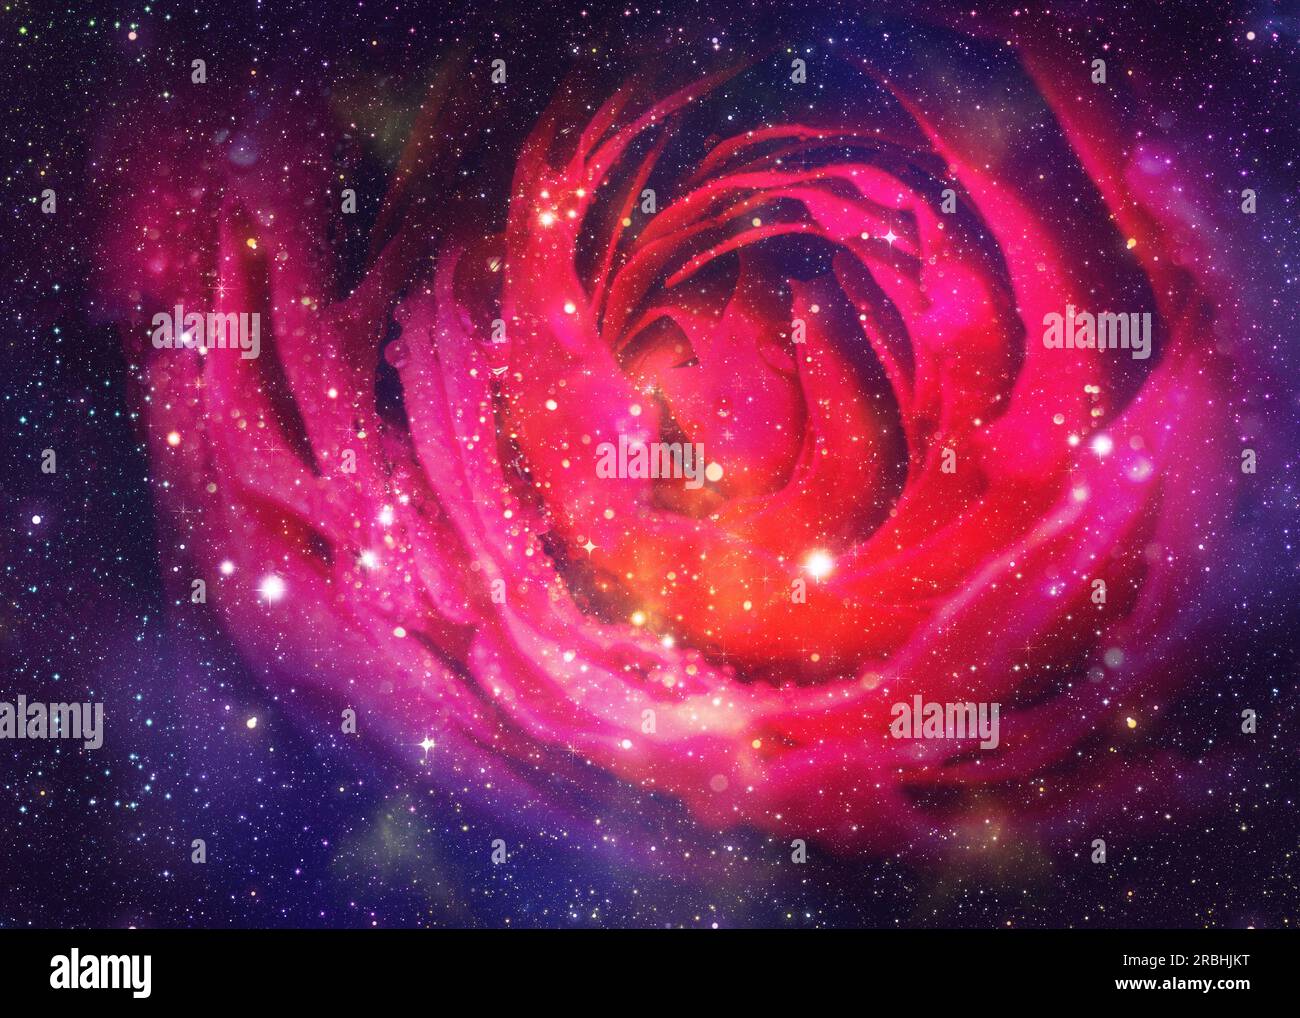 Red rose flower over starry space background, illustration, photo manipulation. Stock Photo